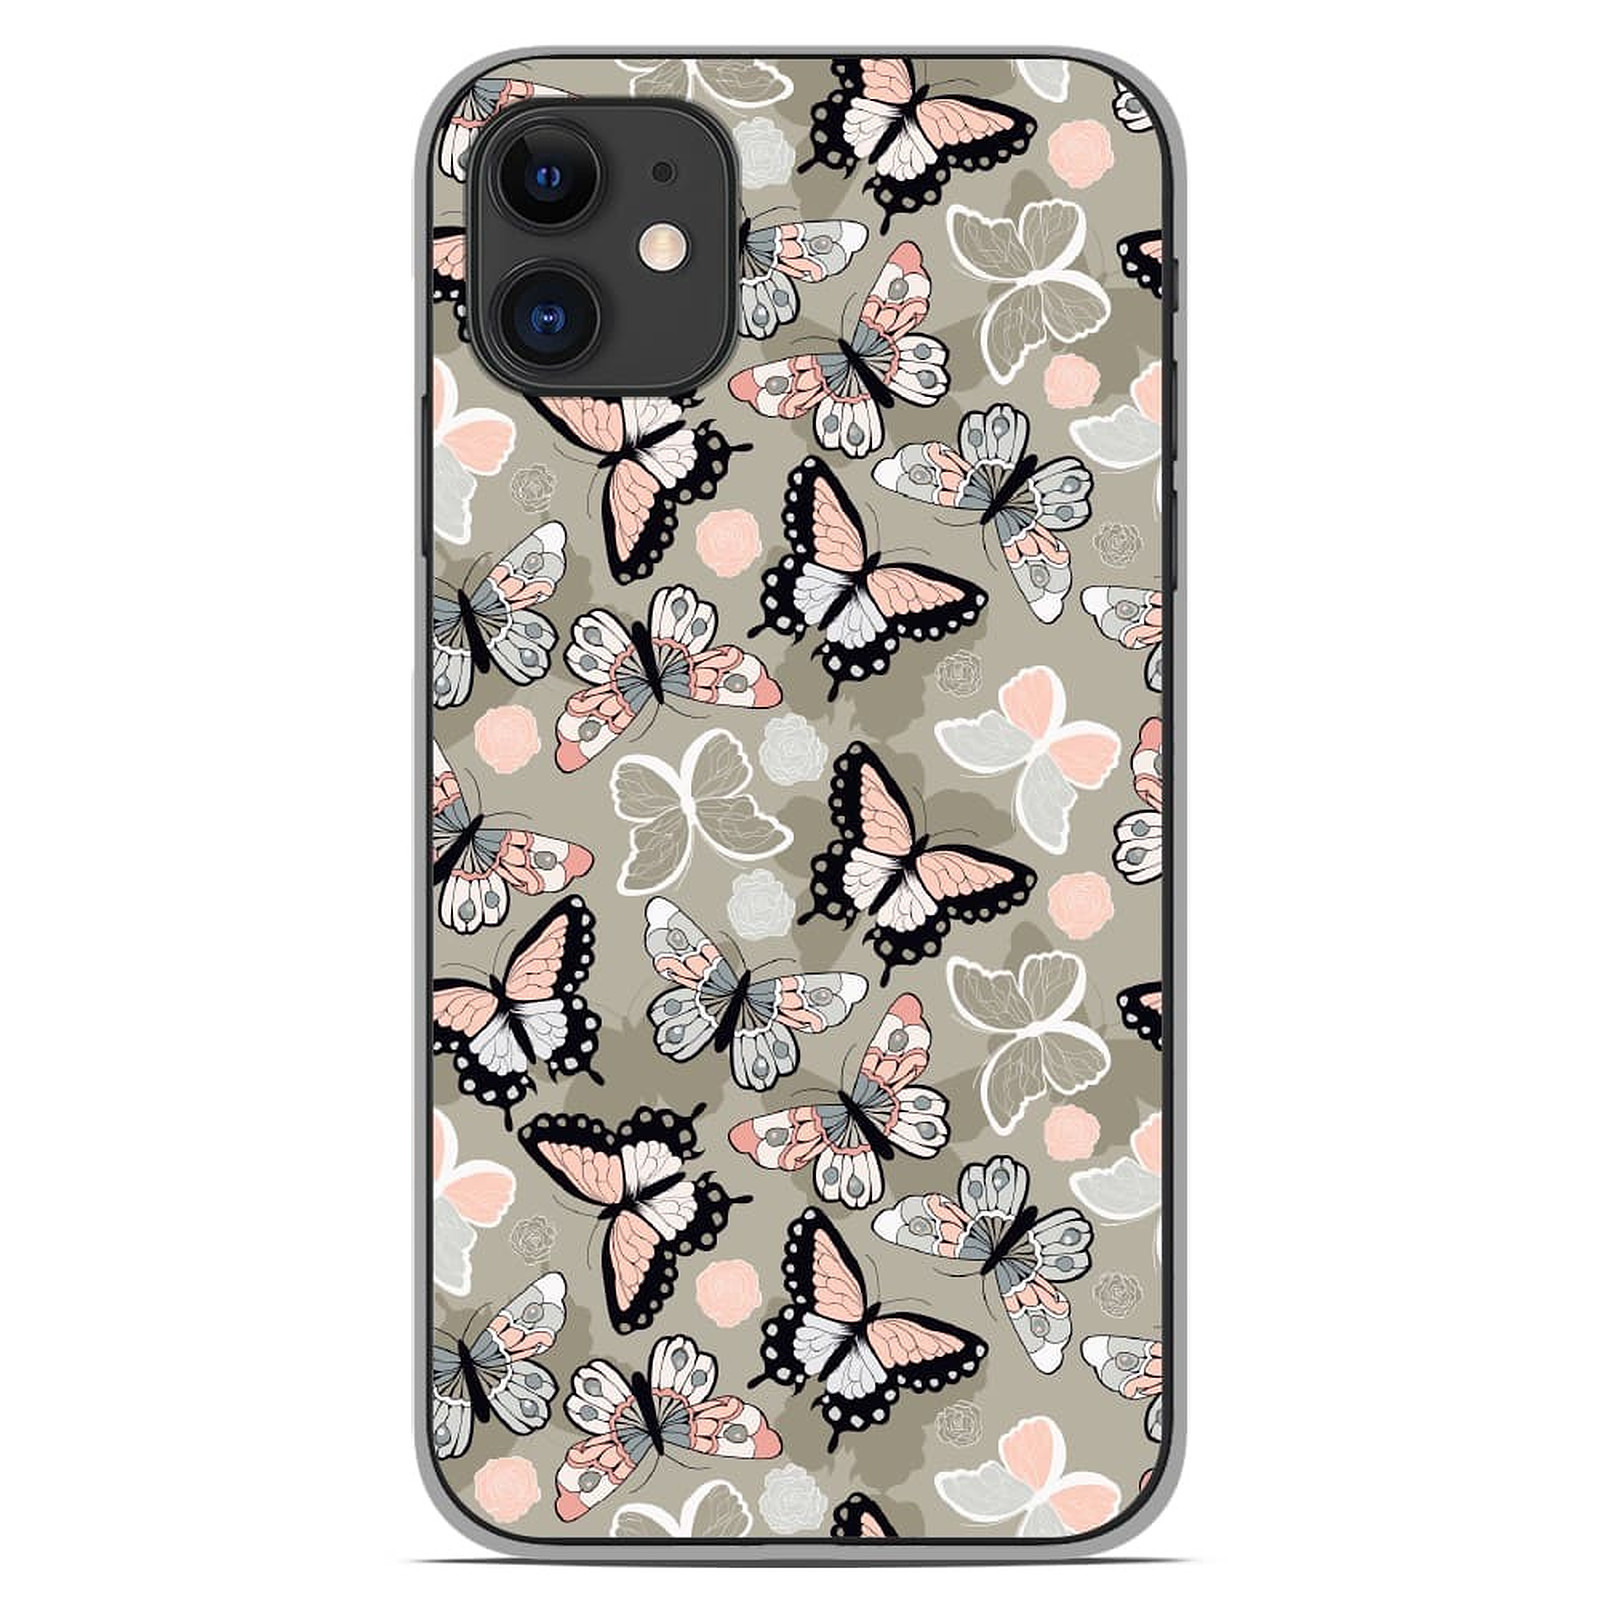 1001 Coques Coque silicone gel Apple iPhone 11 motif Papillons Vintage - Coque telephone 1001Coques